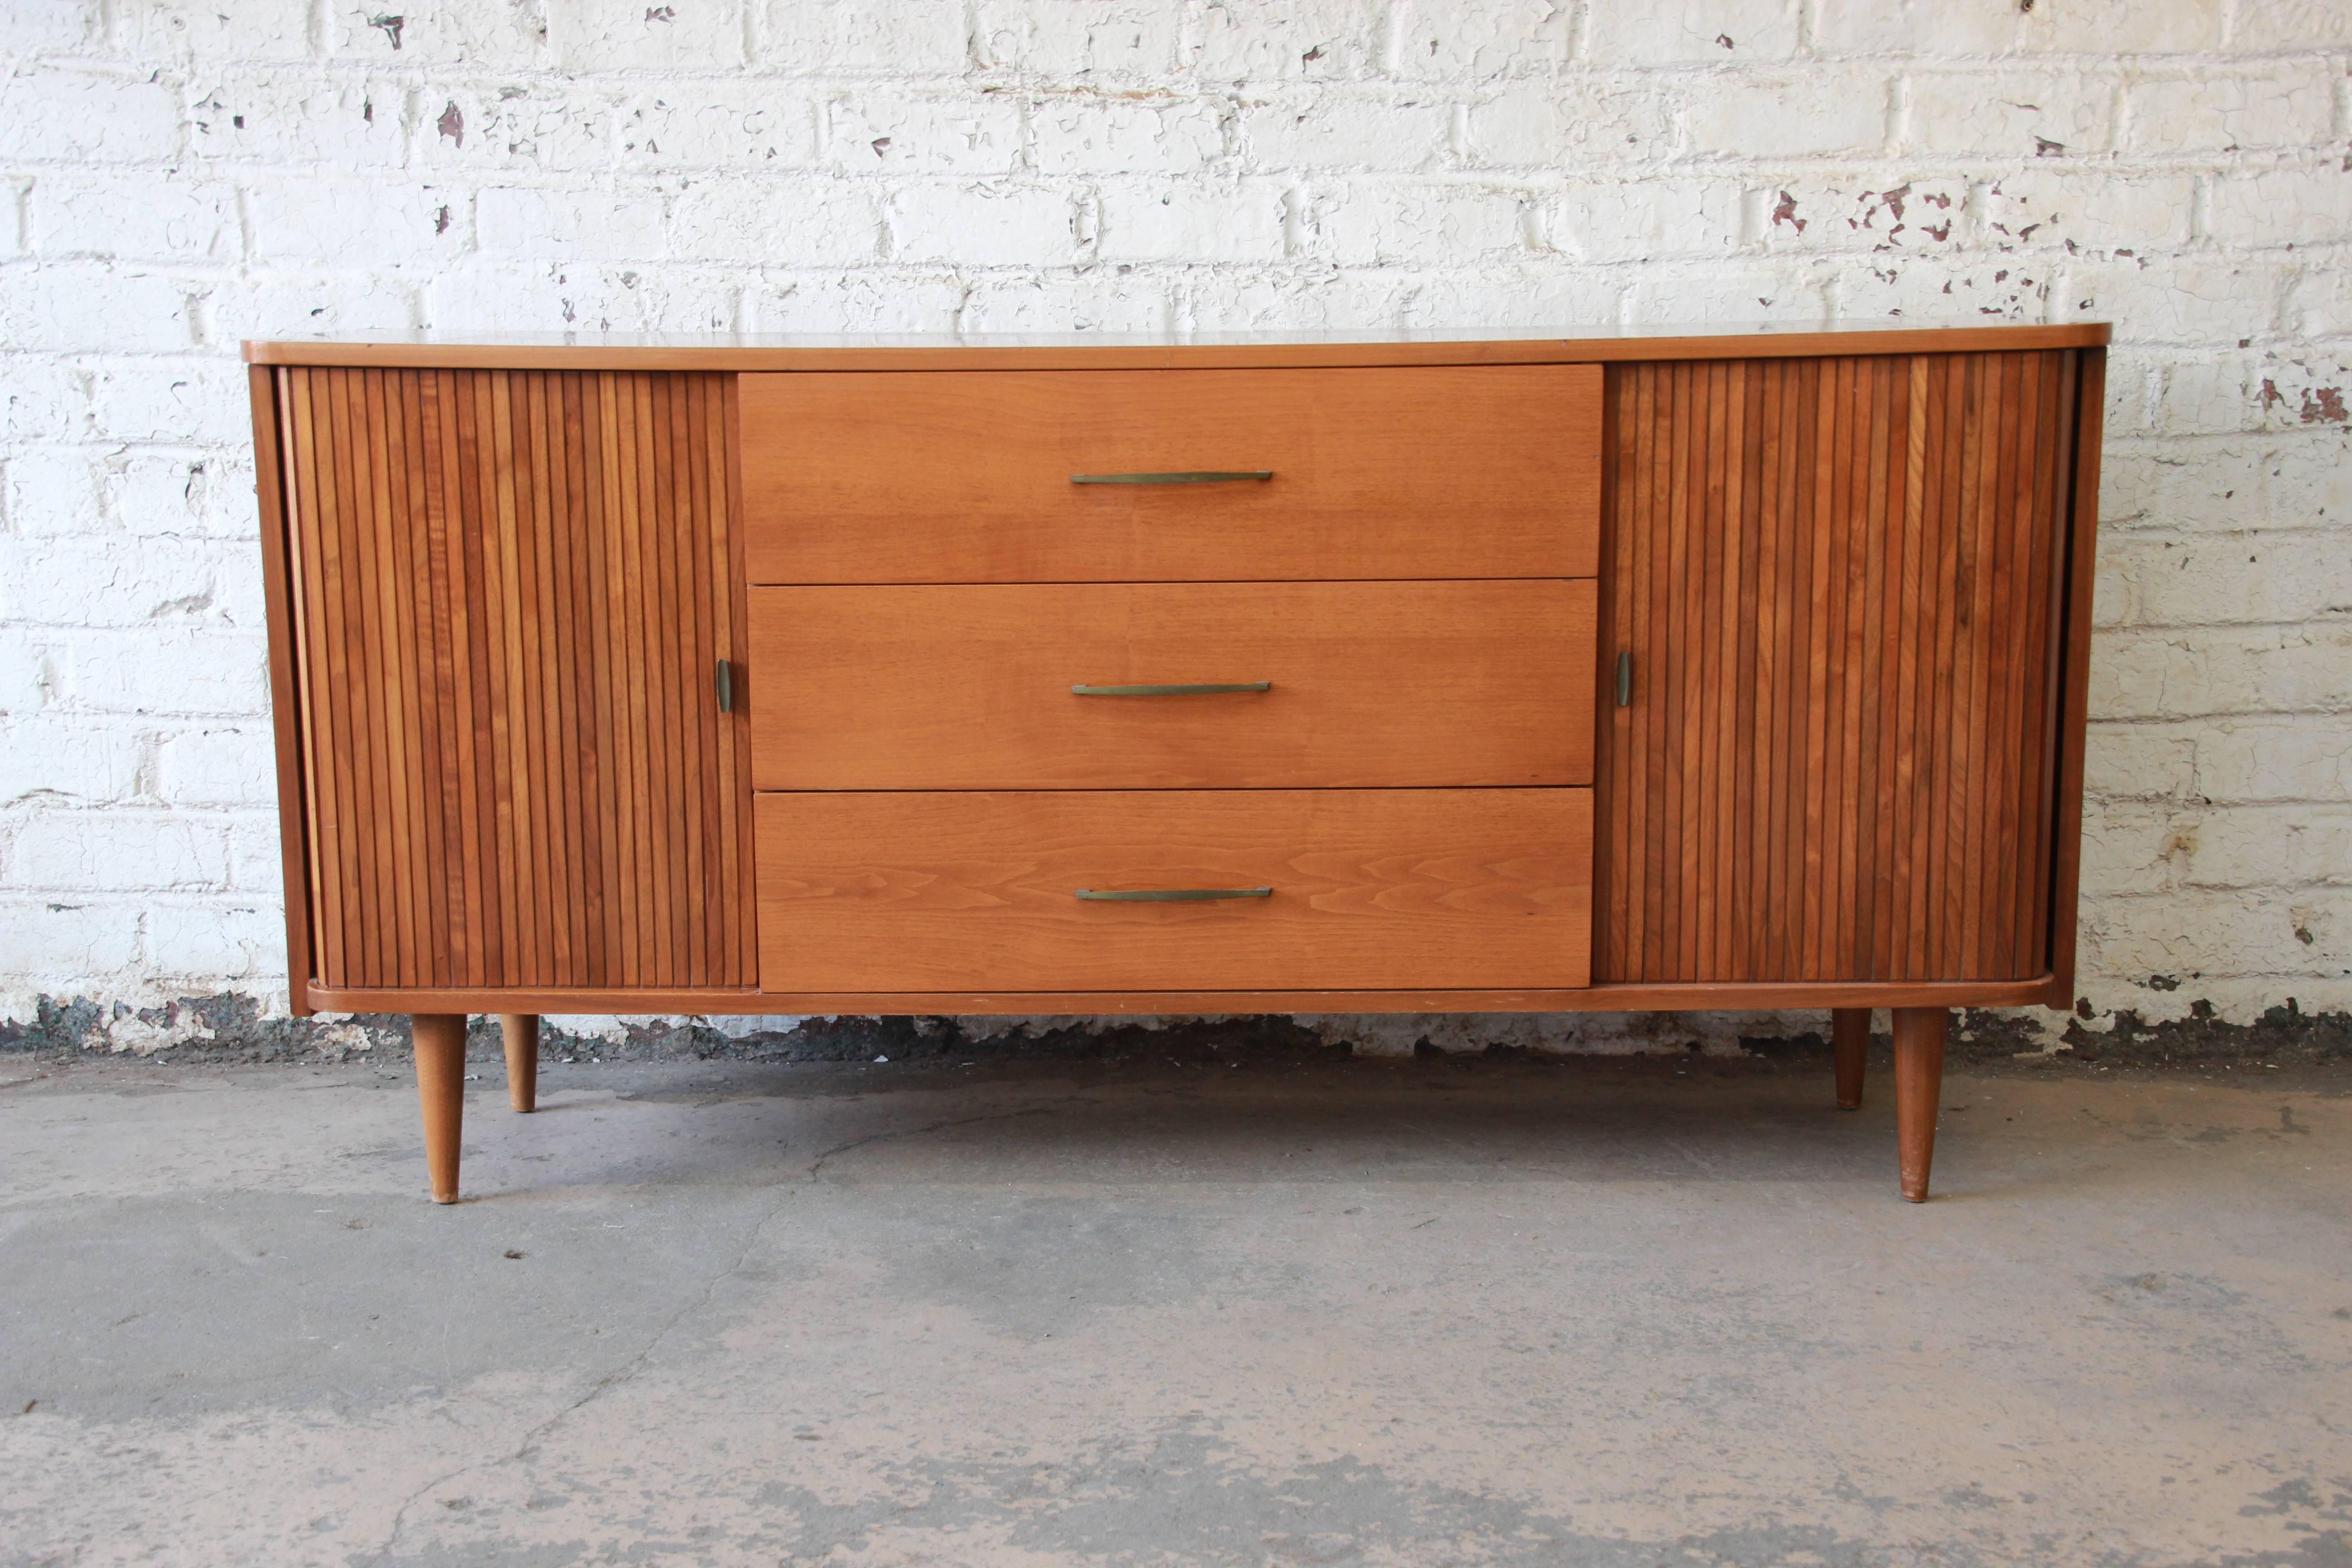 American Mid-Century Modern Tambour Door Sideboard Credenza with Glass Front Hutch Top